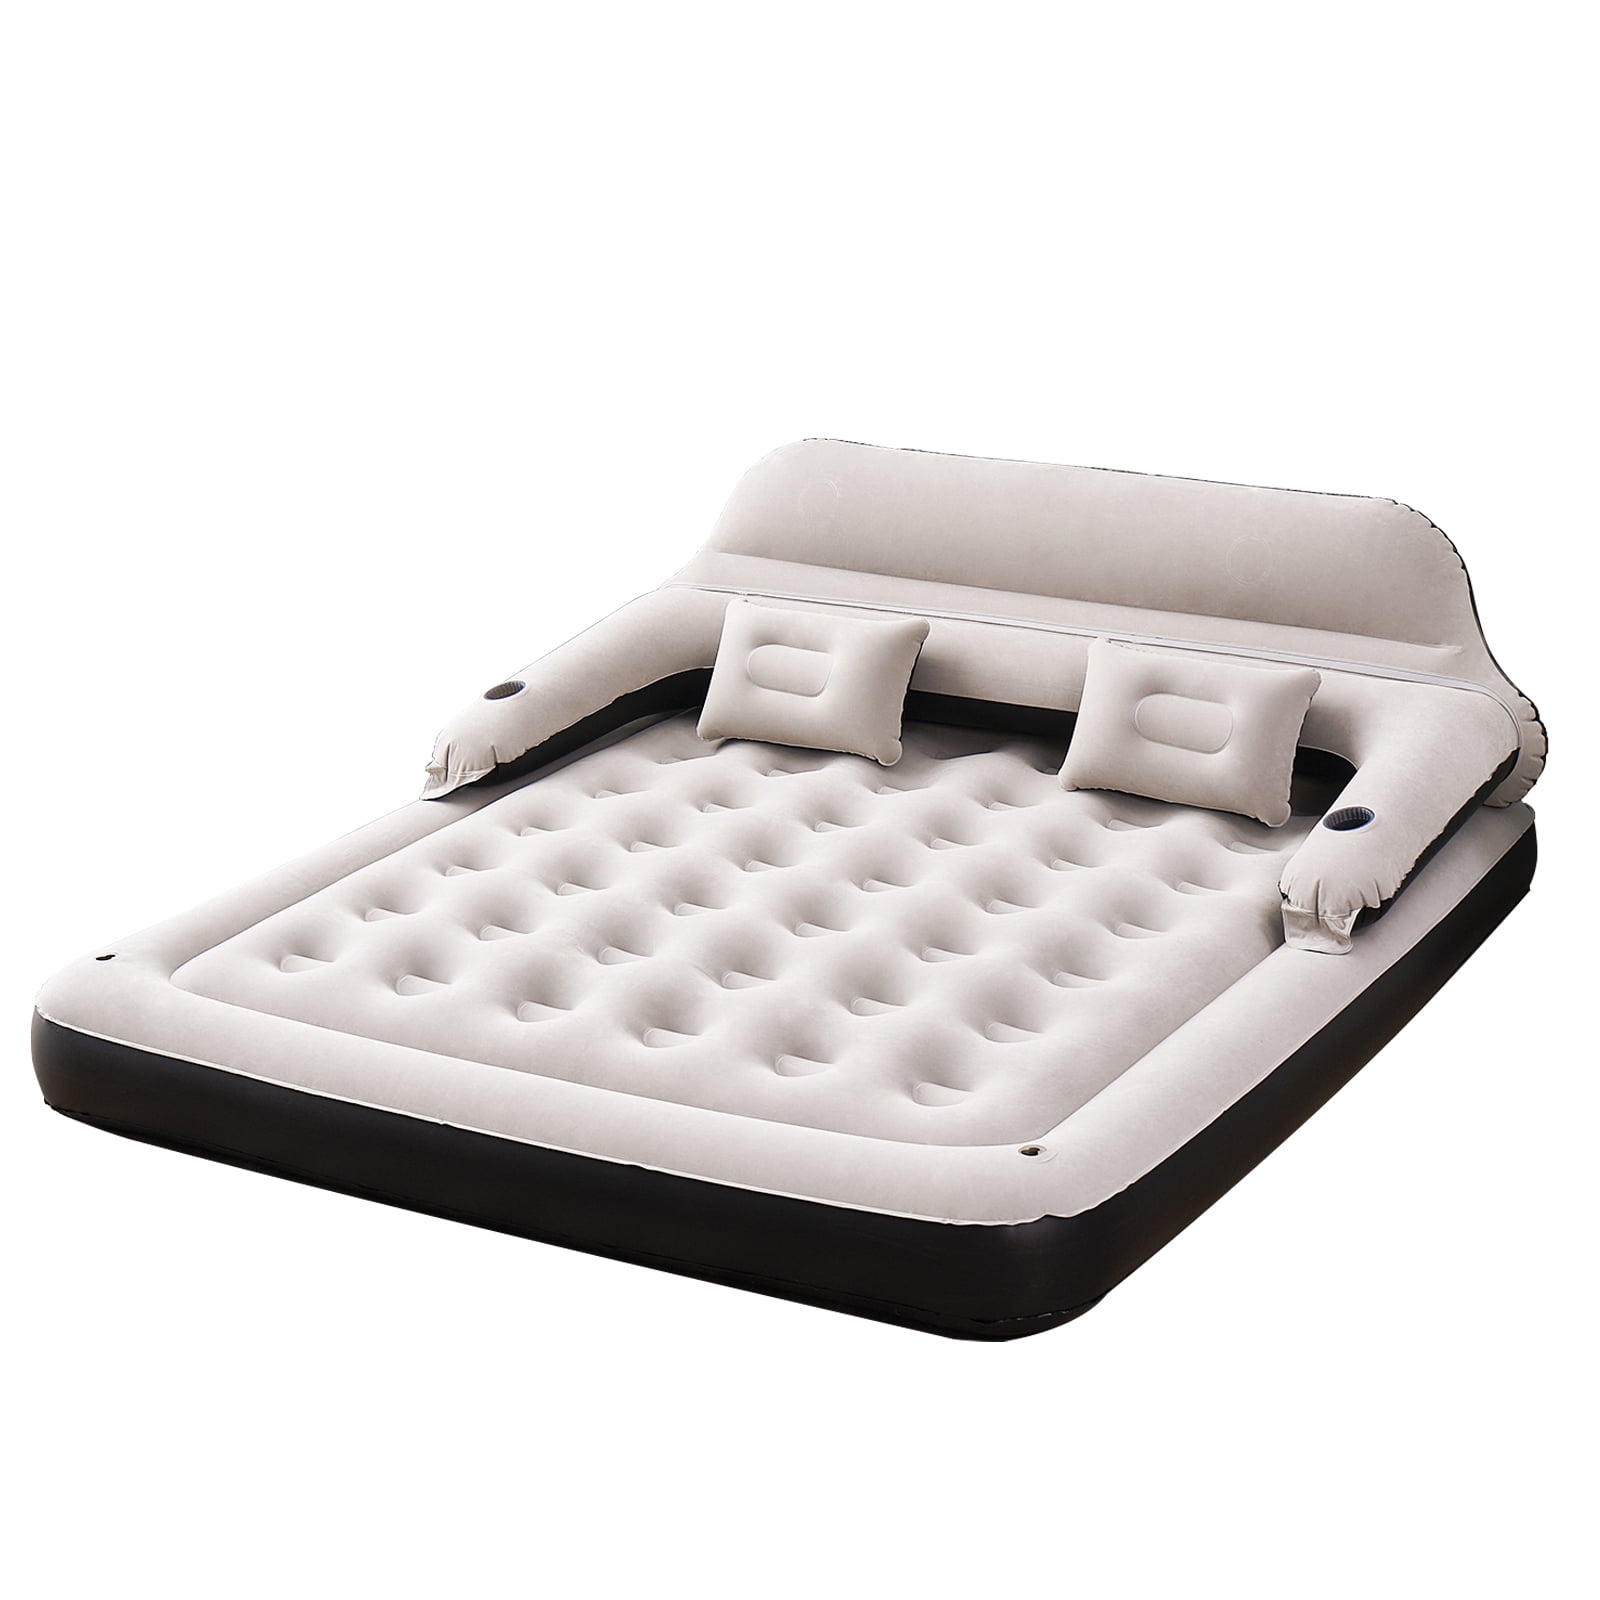  Bestrip Auto Inflatable Couch, Air Mattress Sofa Bed with  Portable Air Pump : Home & Kitchen